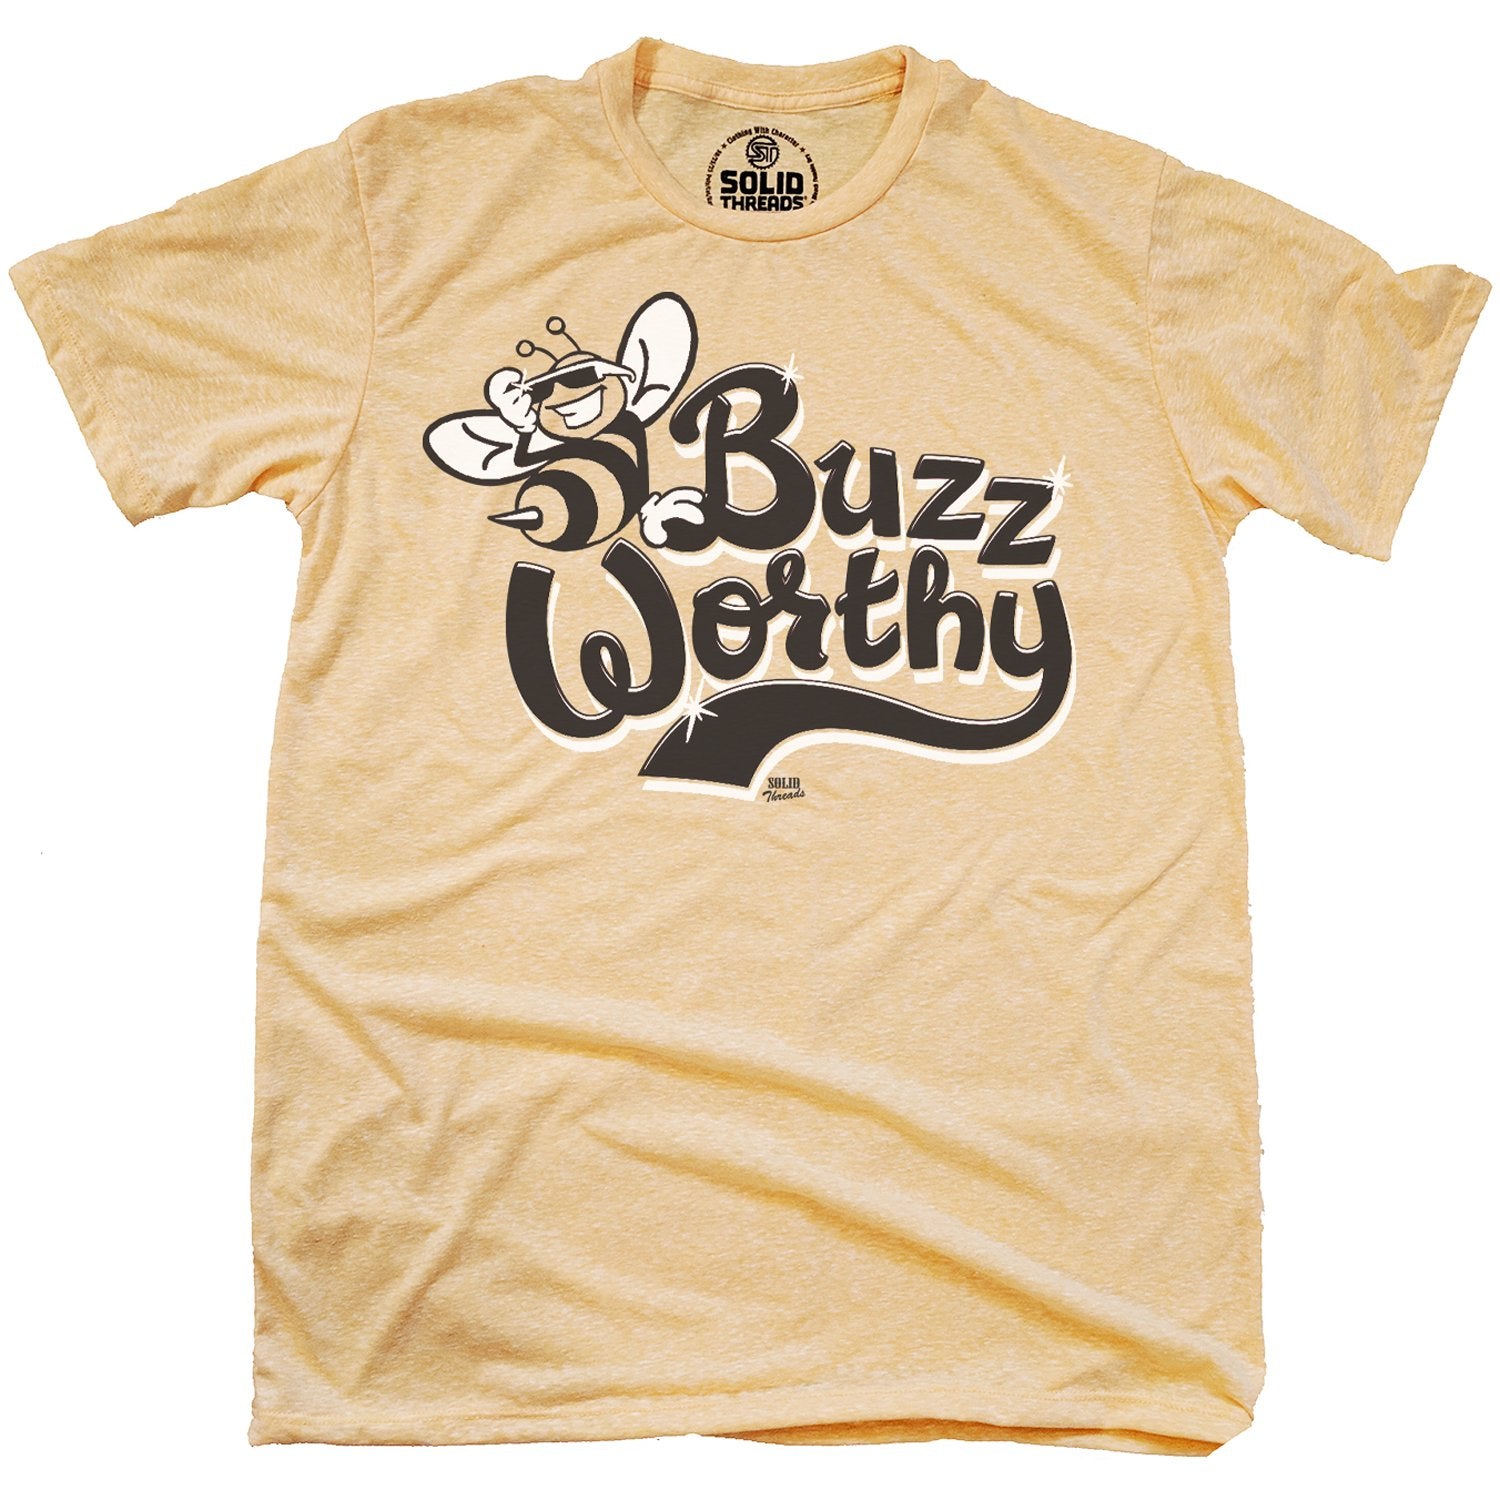 Men's Buzzworthy Cool Pollinator Graphic T-Shirt | Funny Bumble Bee Tee | Solid Threads